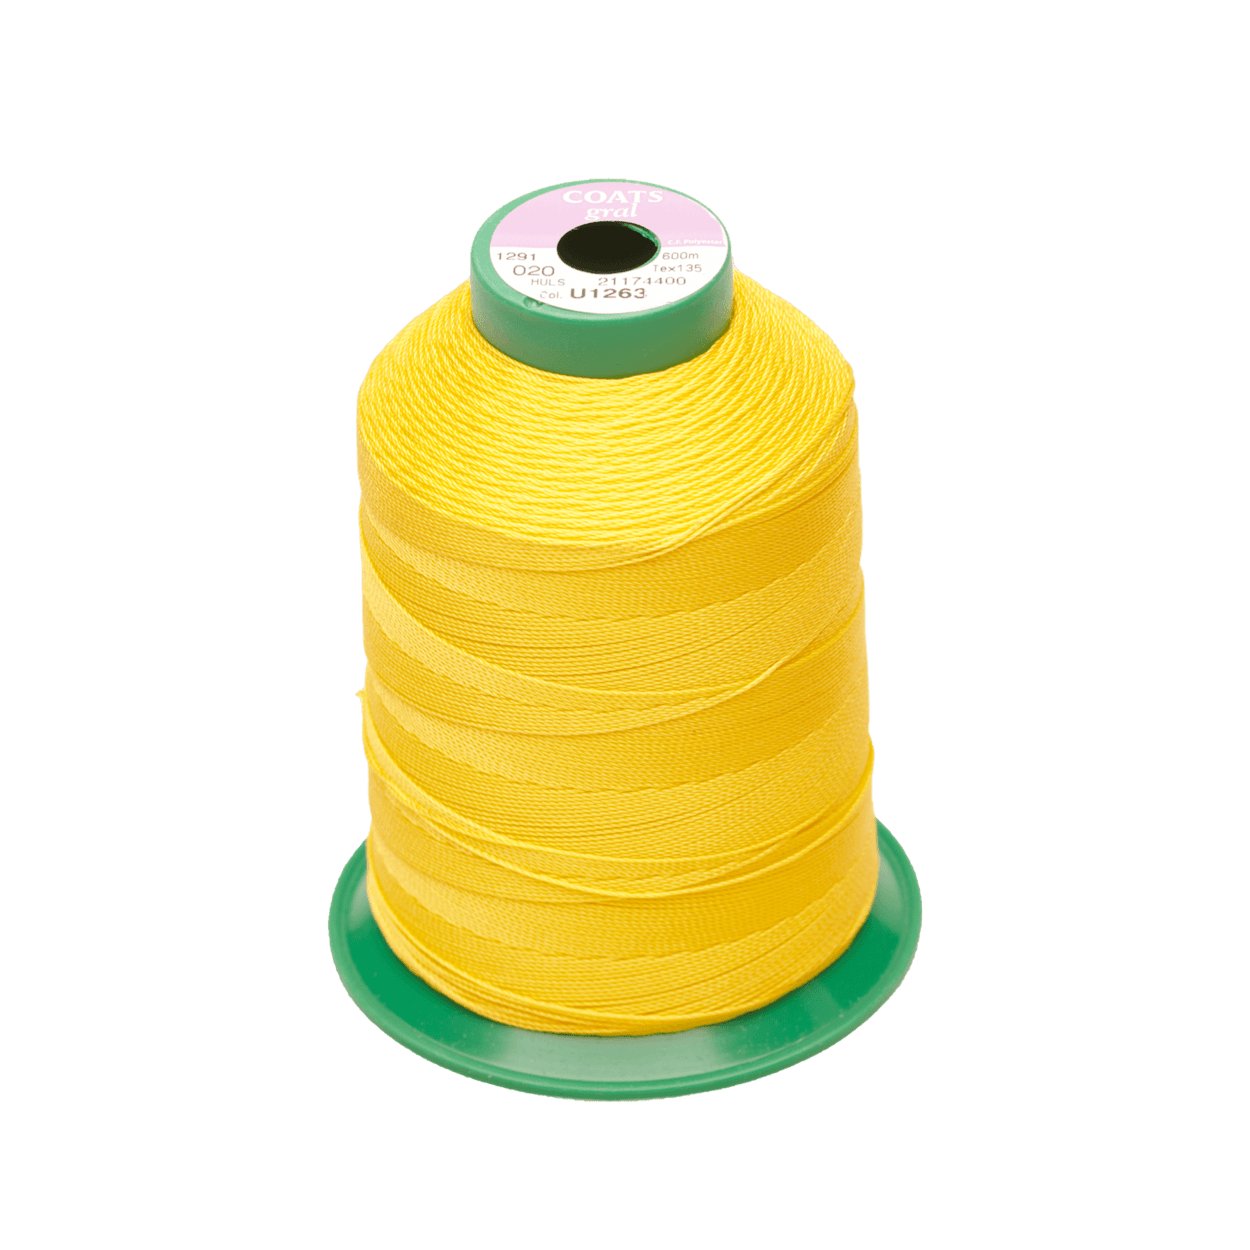 Duotone Thread poly Gral 20 600m (SS20-SS22) 2022 - Worthing Watersports - 9008415889990 - Spareparts - Duotone Kiteboarding